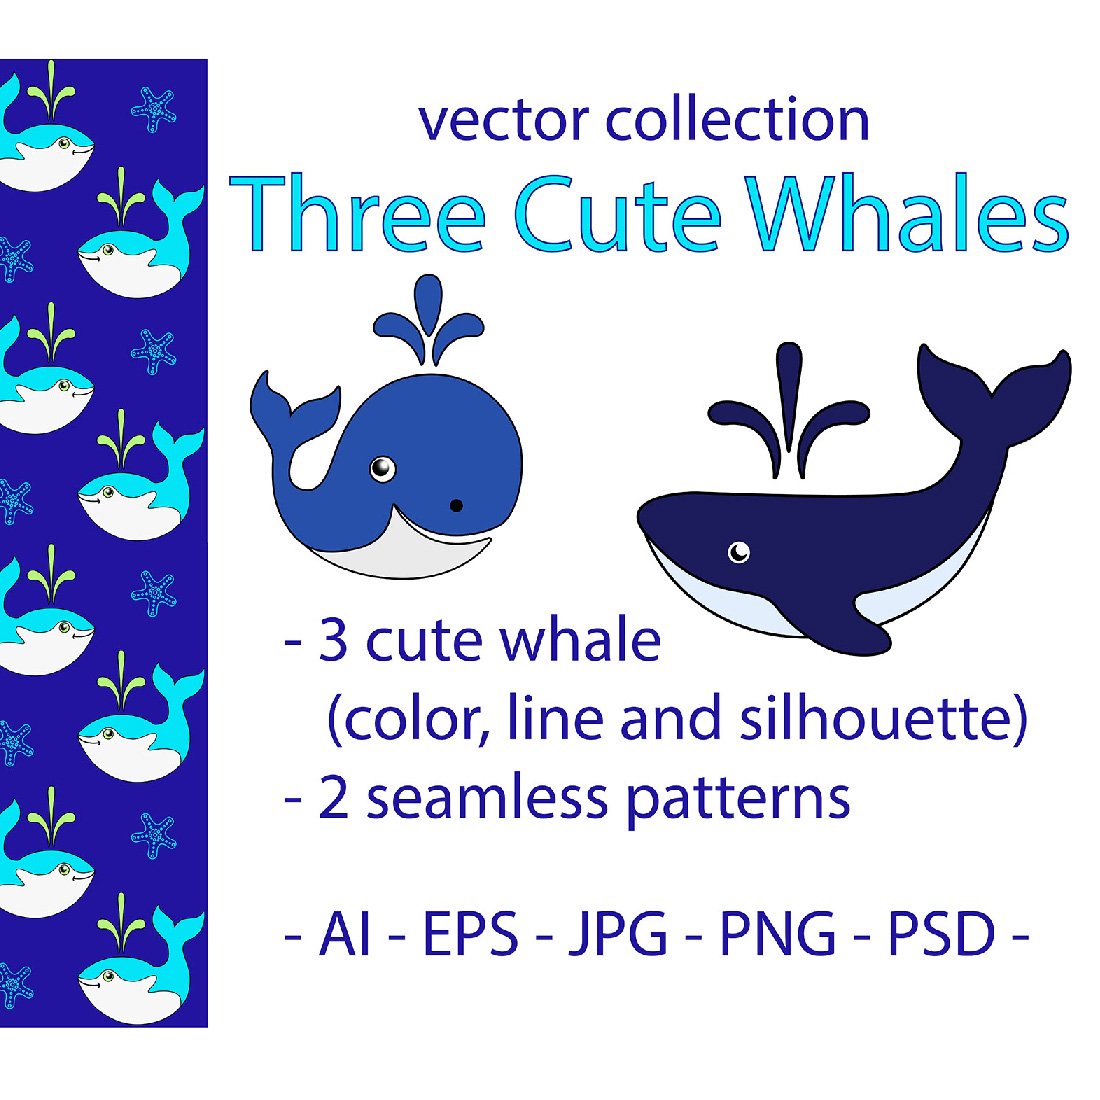 Three Cute Whales cover image.